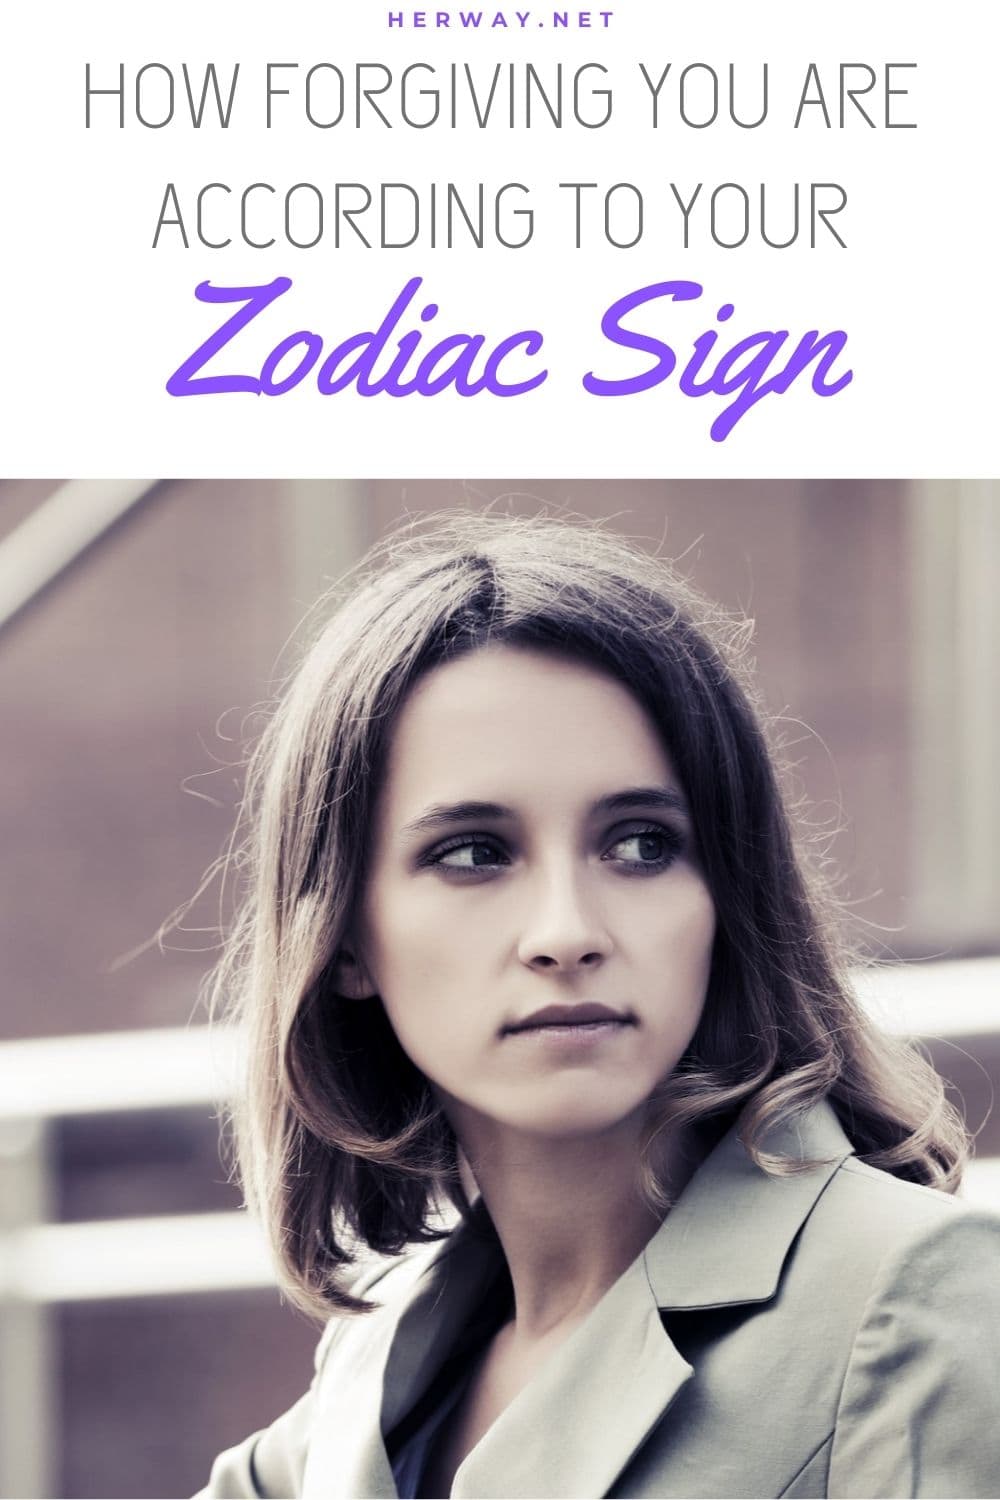 How Forgiving You Are According To Your Zodiac Sign